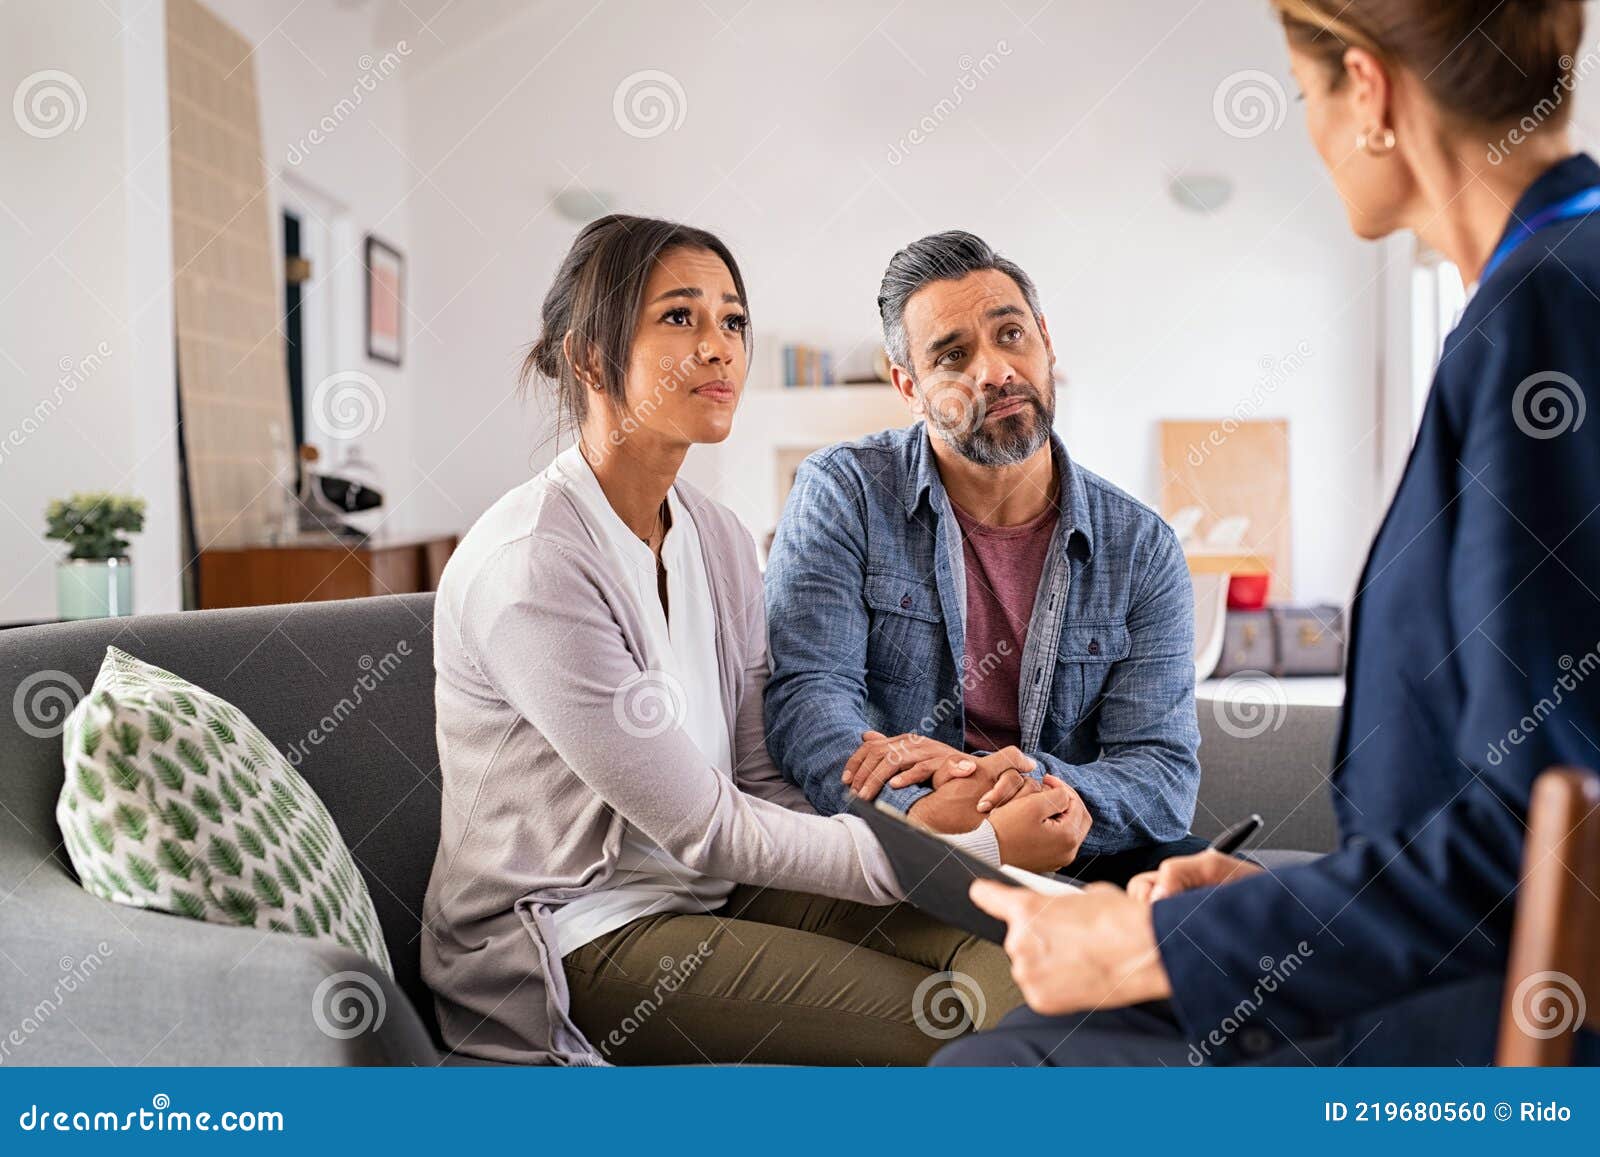 worried couple meeting social counselor